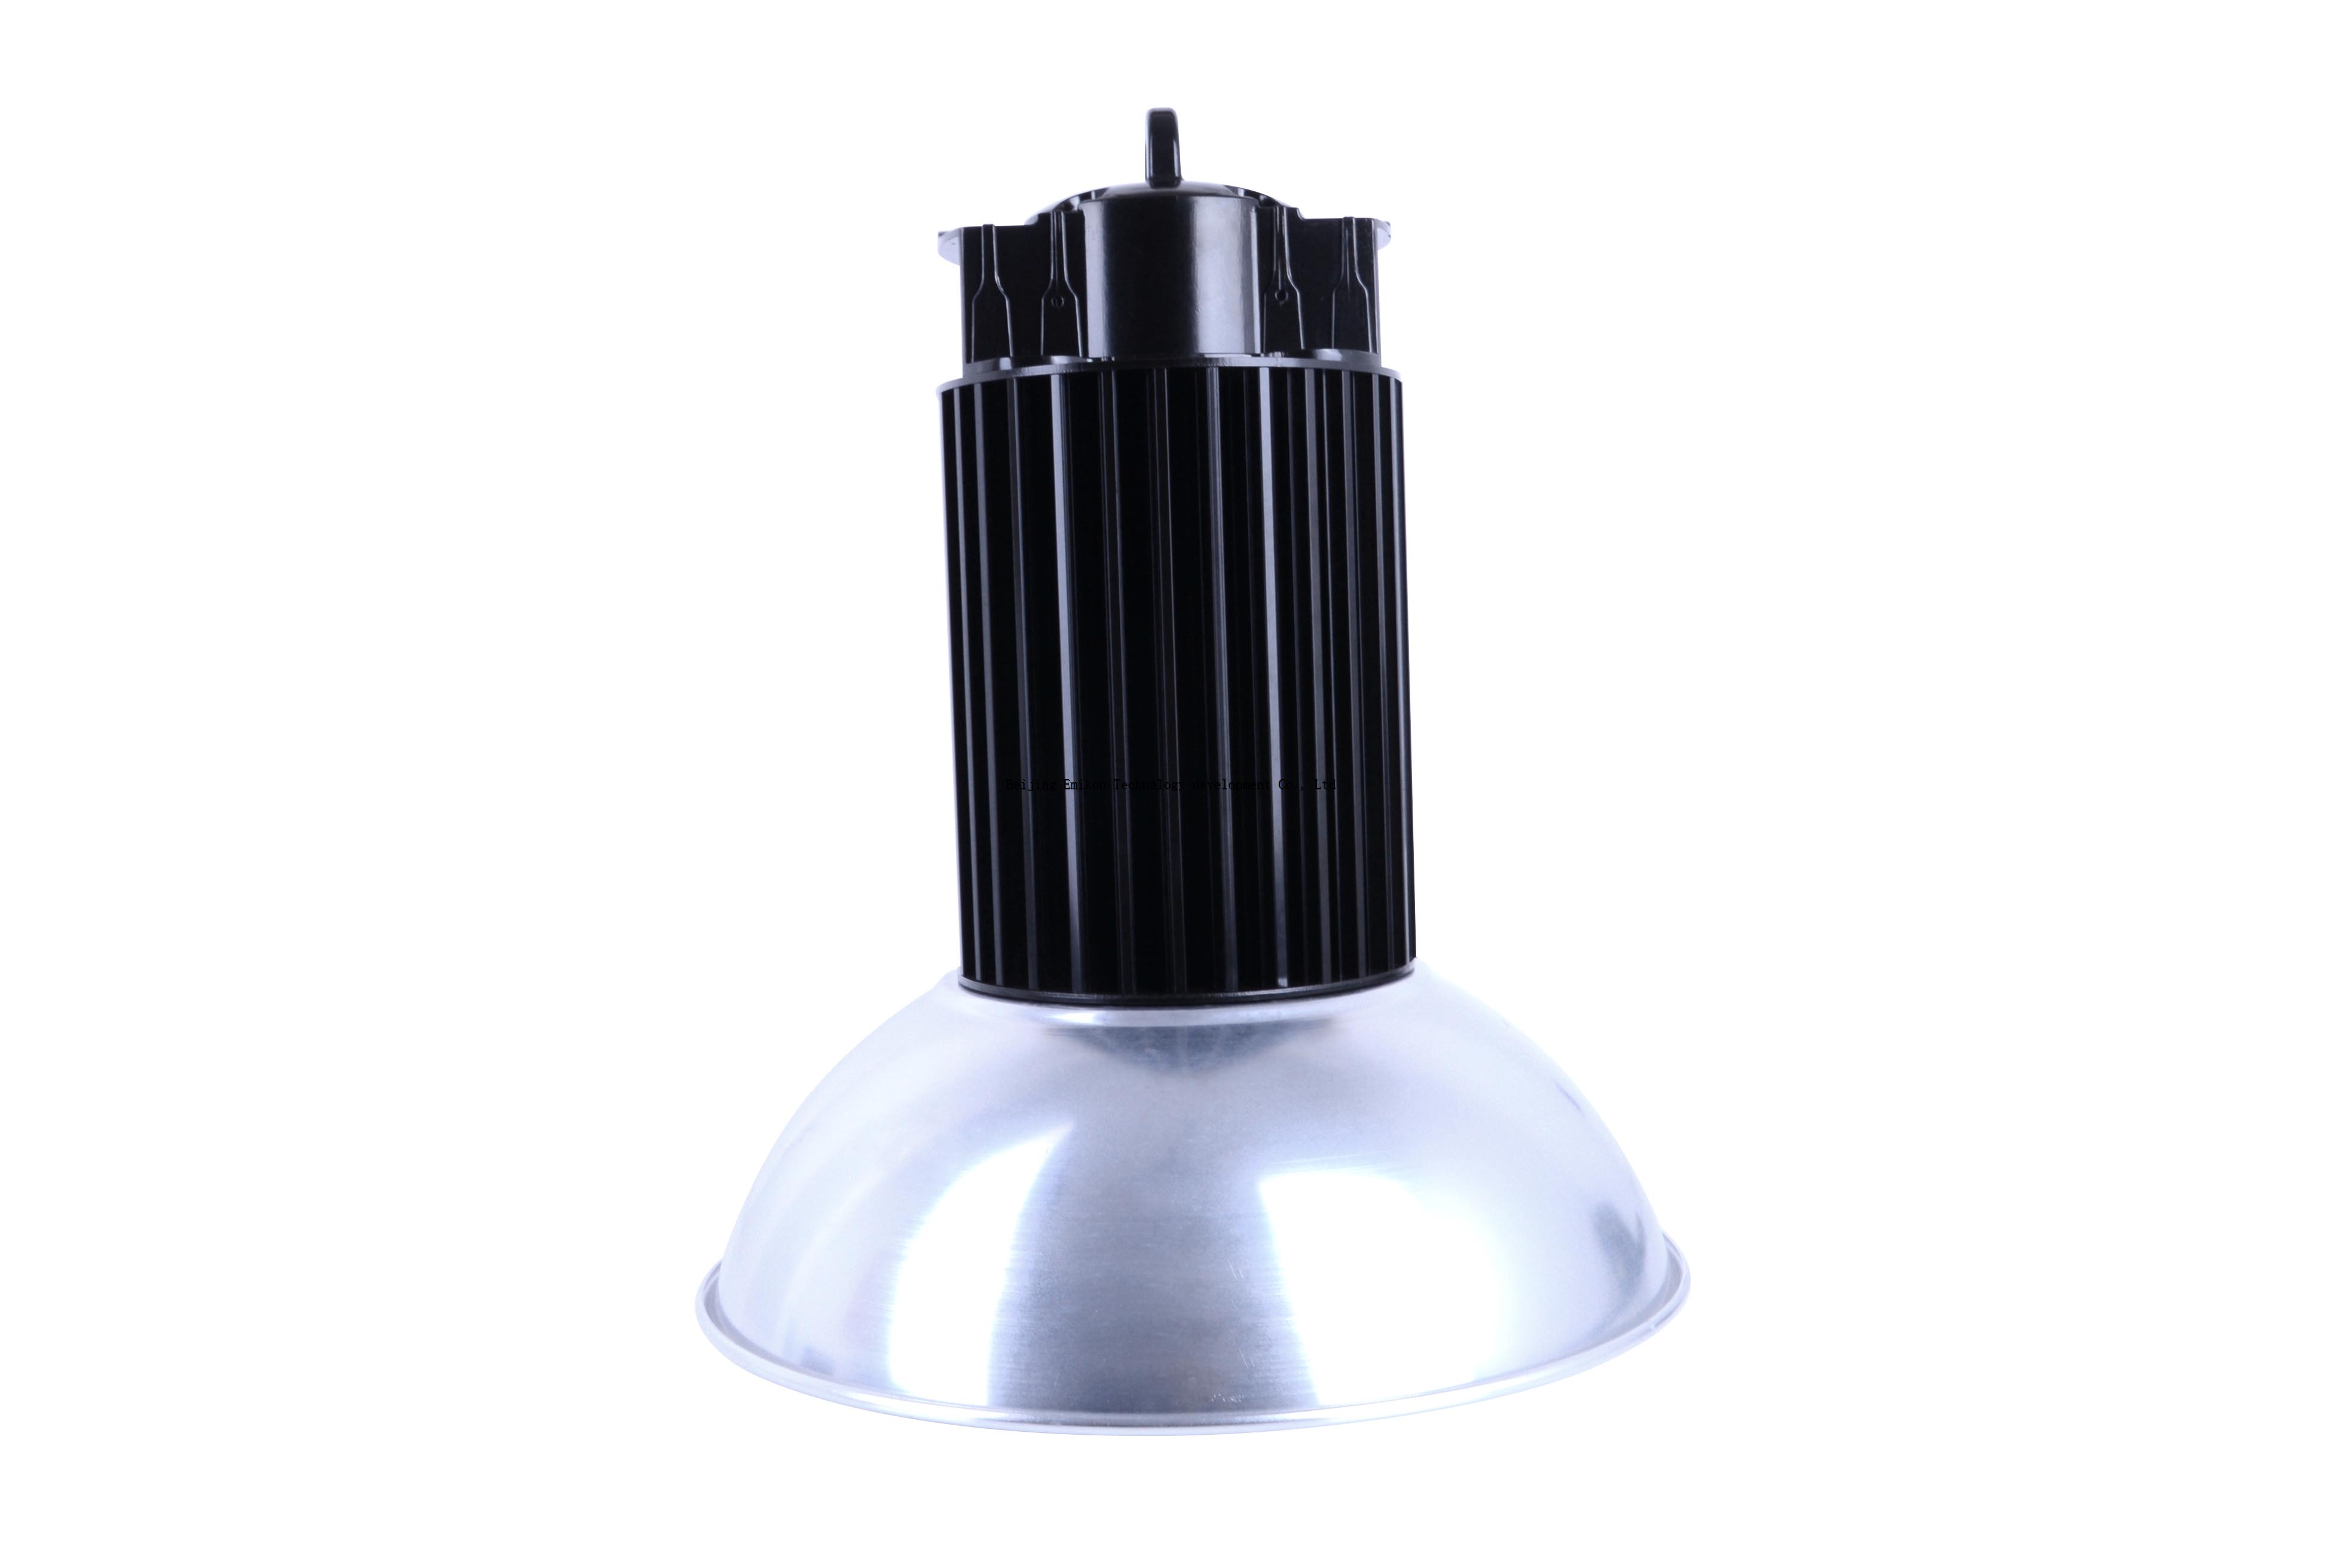 High quality LED high bay light with 100W Power 